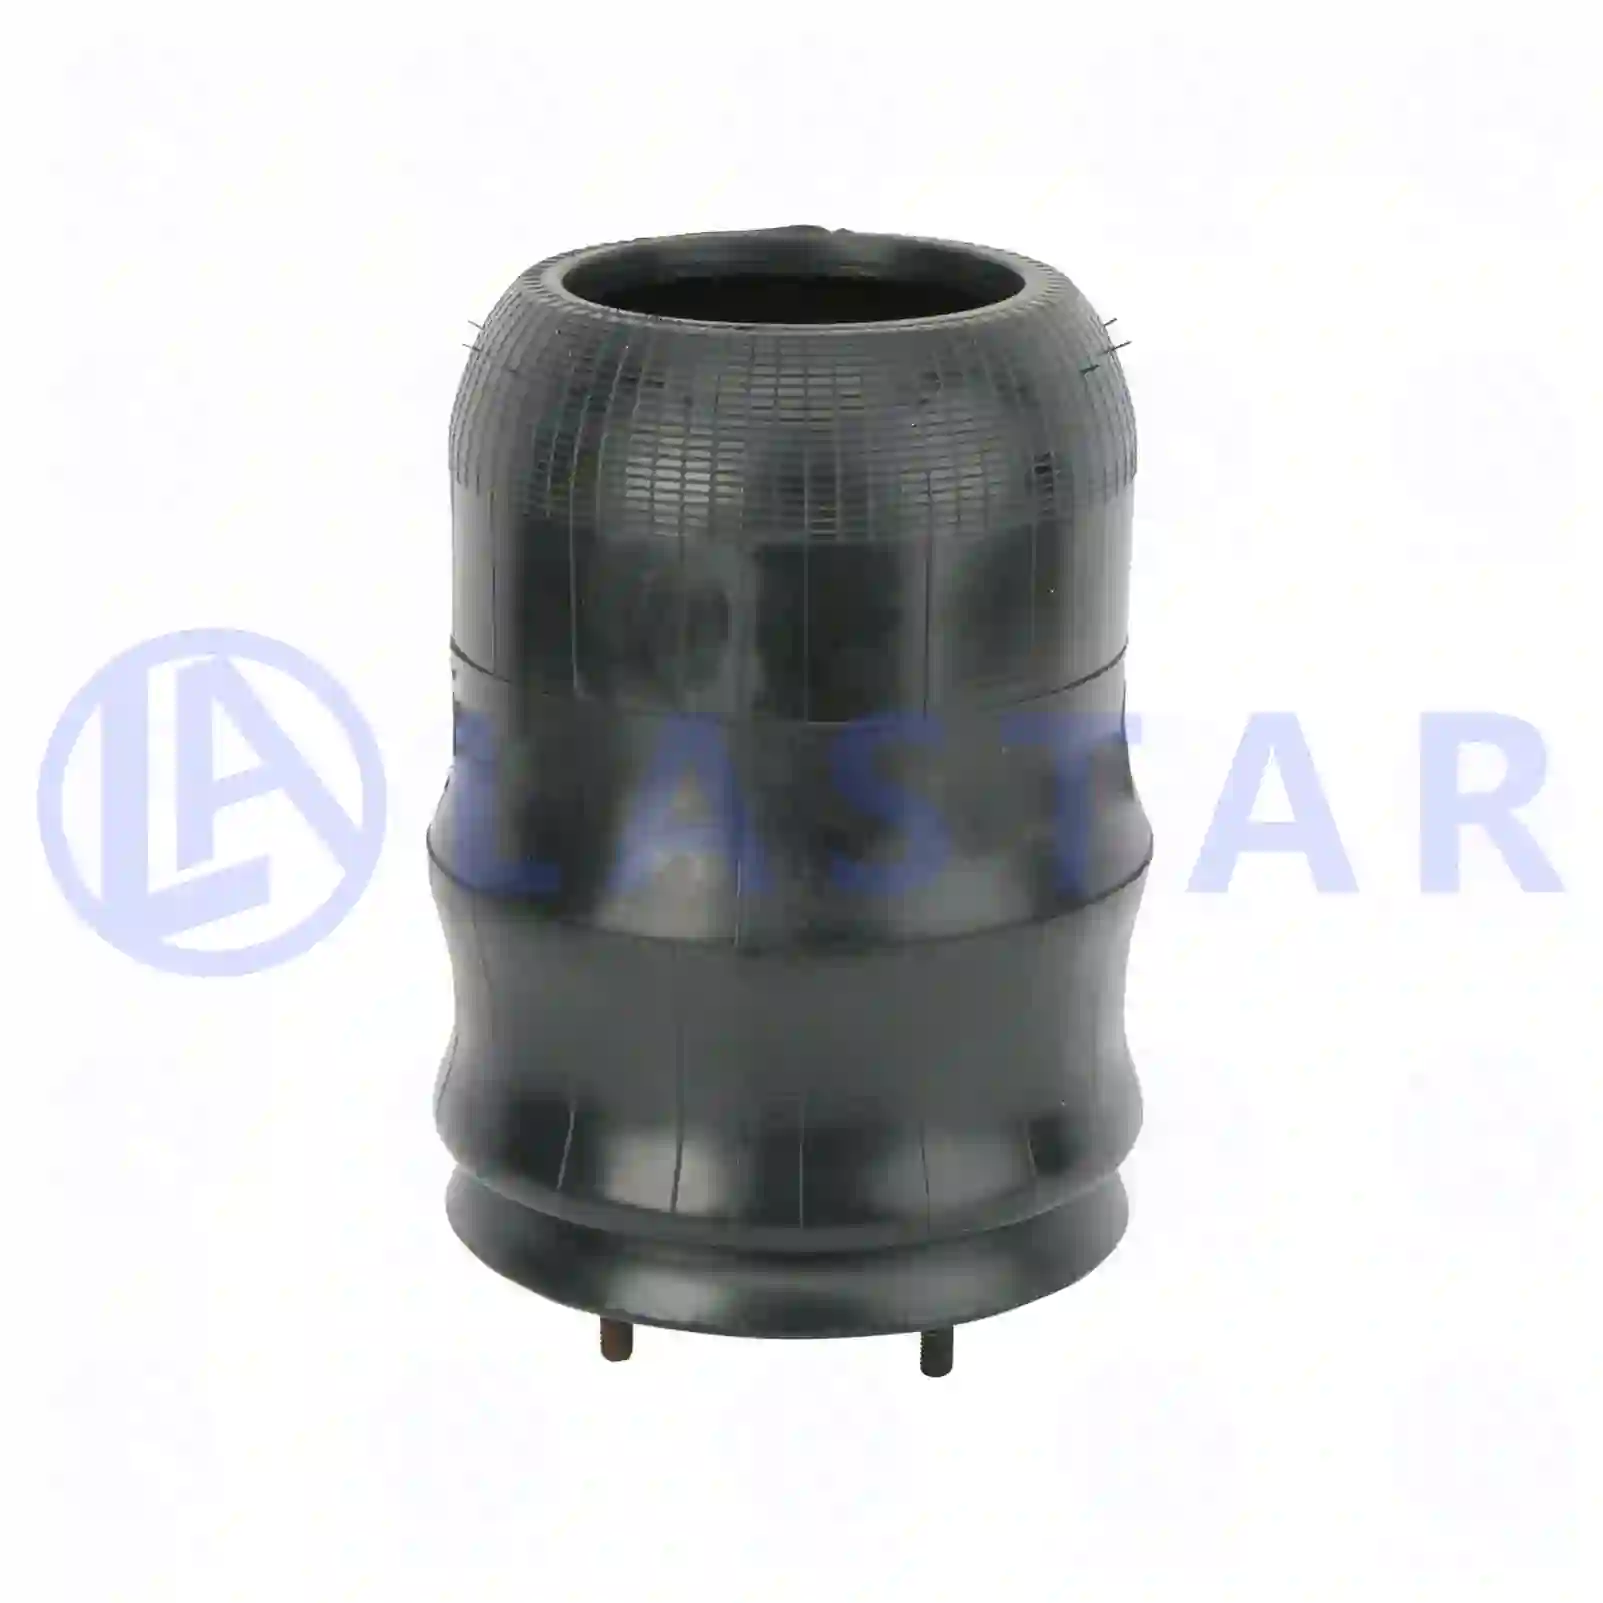 Air spring, with steel piston, 77726992, 20535876, 3195976, ZG40764-0008 ||  77726992 Lastar Spare Part | Truck Spare Parts, Auotomotive Spare Parts Air spring, with steel piston, 77726992, 20535876, 3195976, ZG40764-0008 ||  77726992 Lastar Spare Part | Truck Spare Parts, Auotomotive Spare Parts